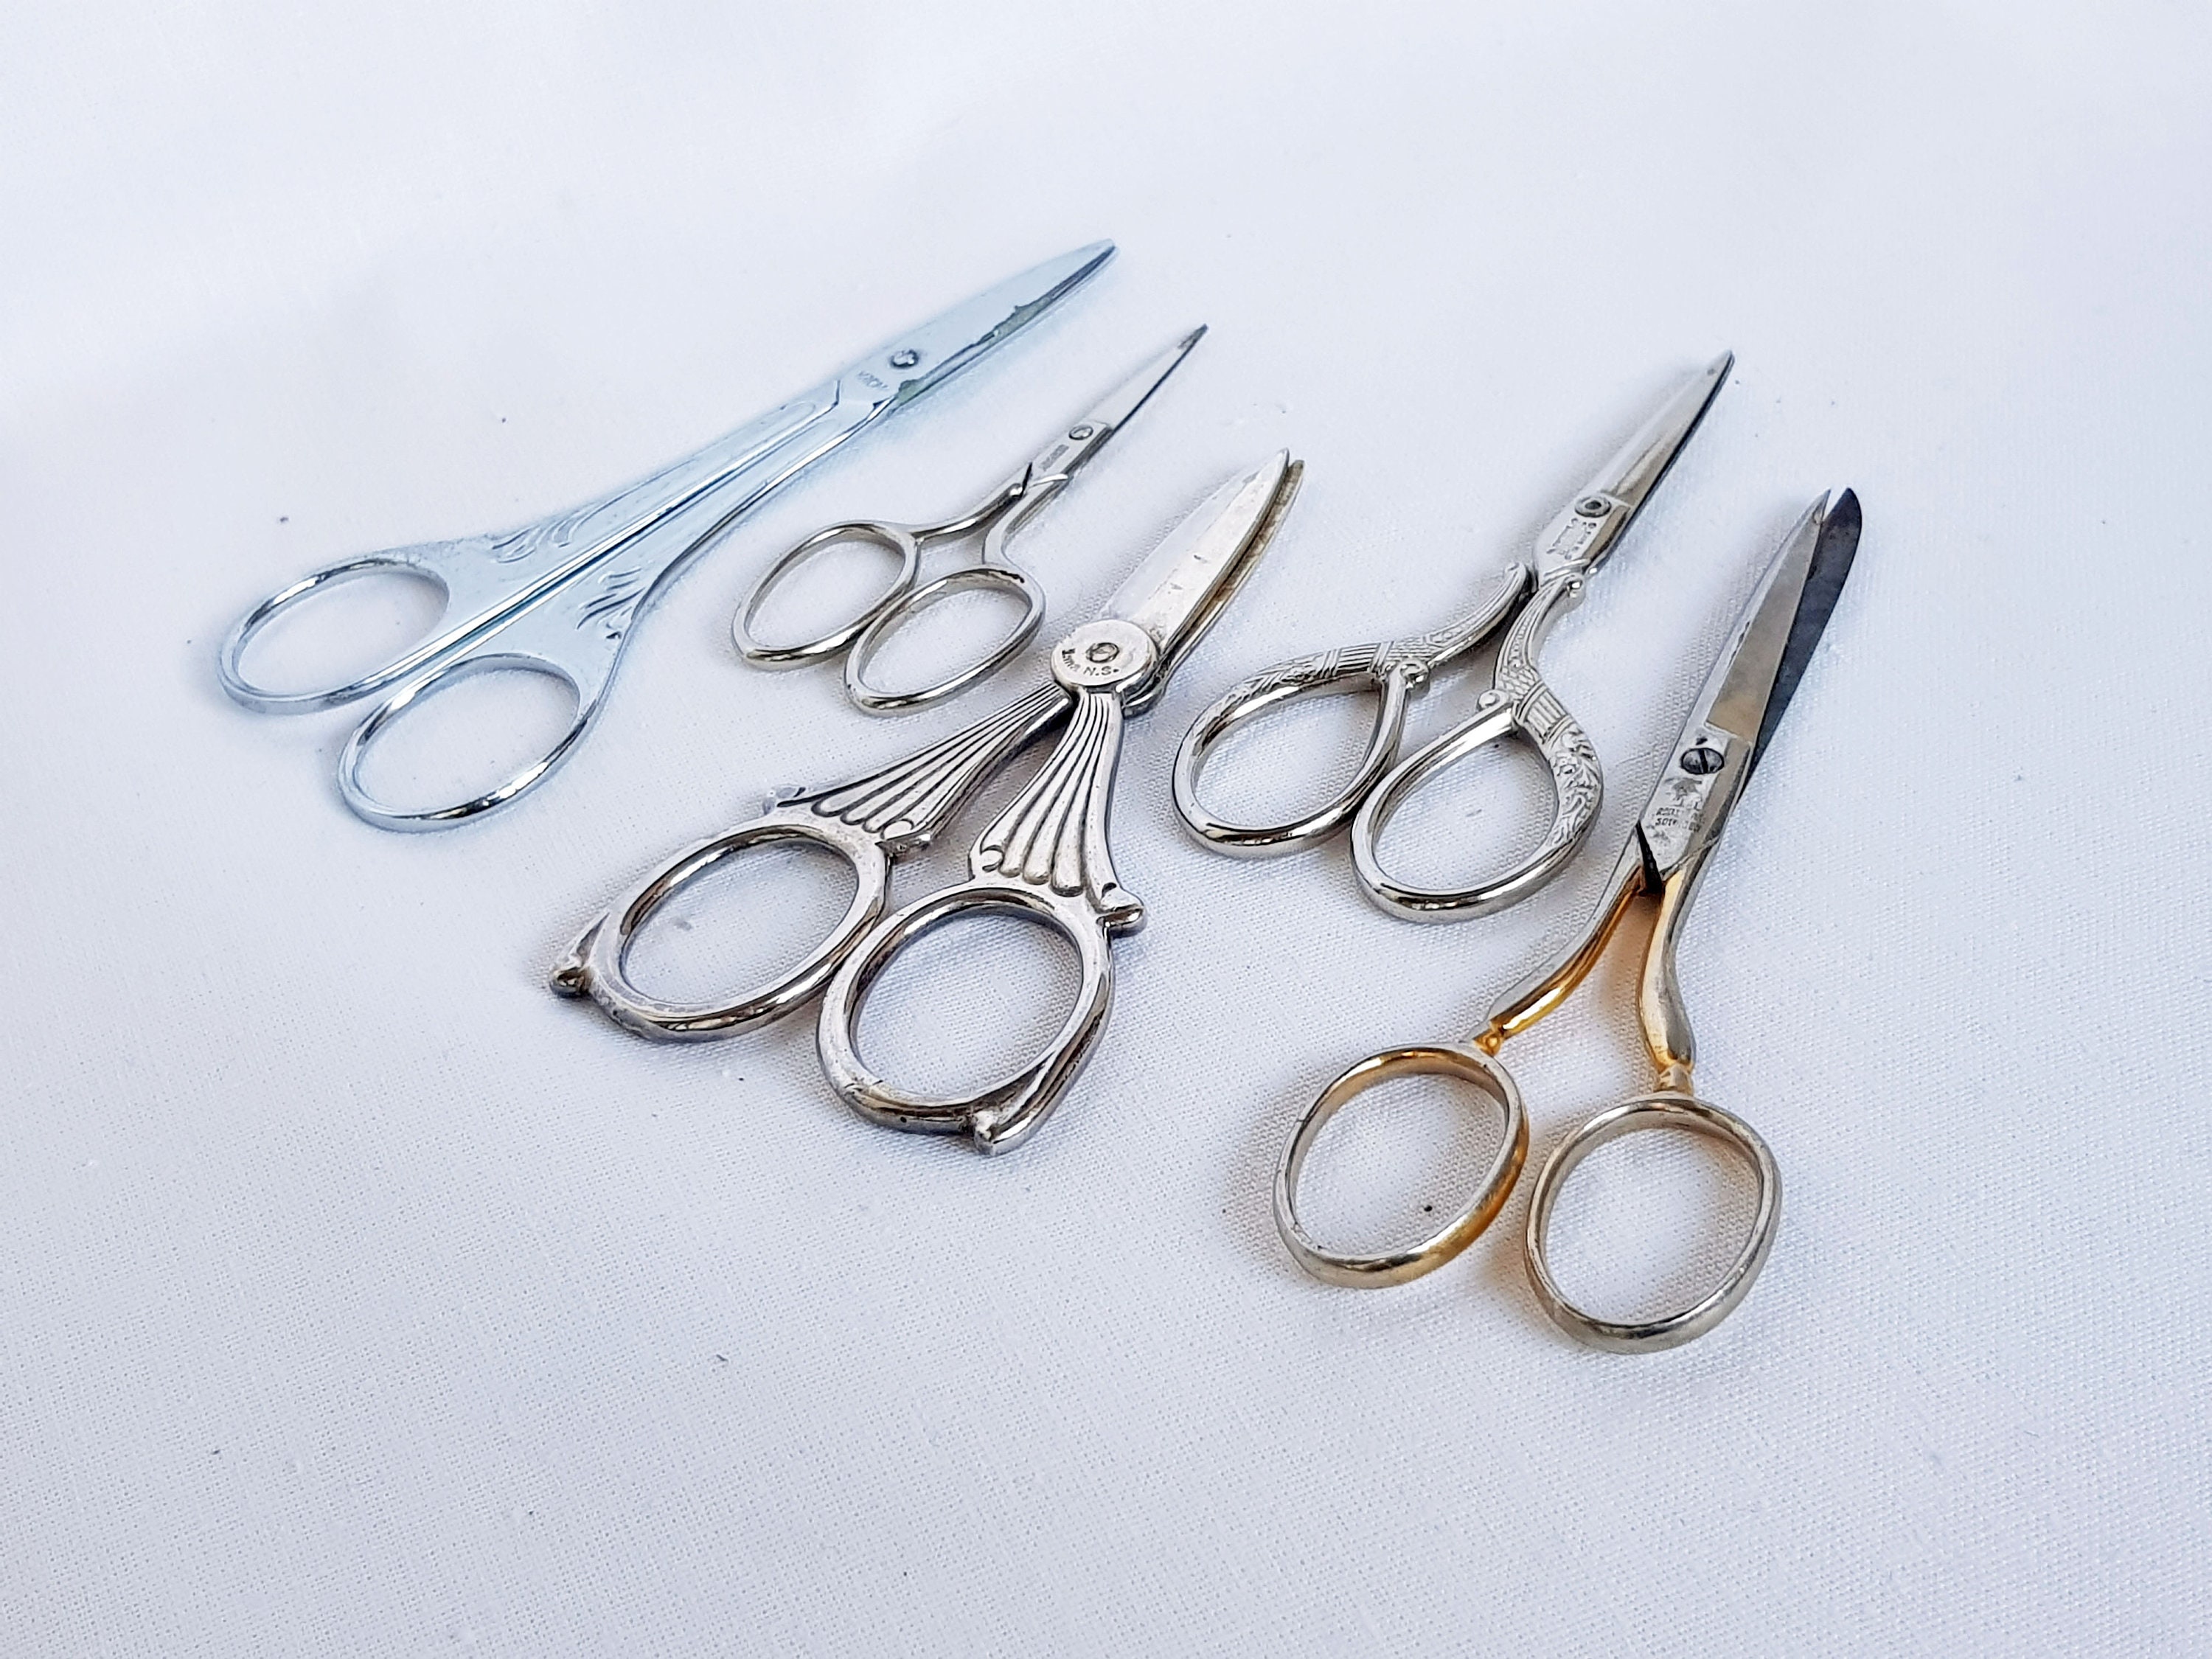 COMPTON COLT Vintage ALL METAL SCISSORS 8 Total Length SEWING TAILOR